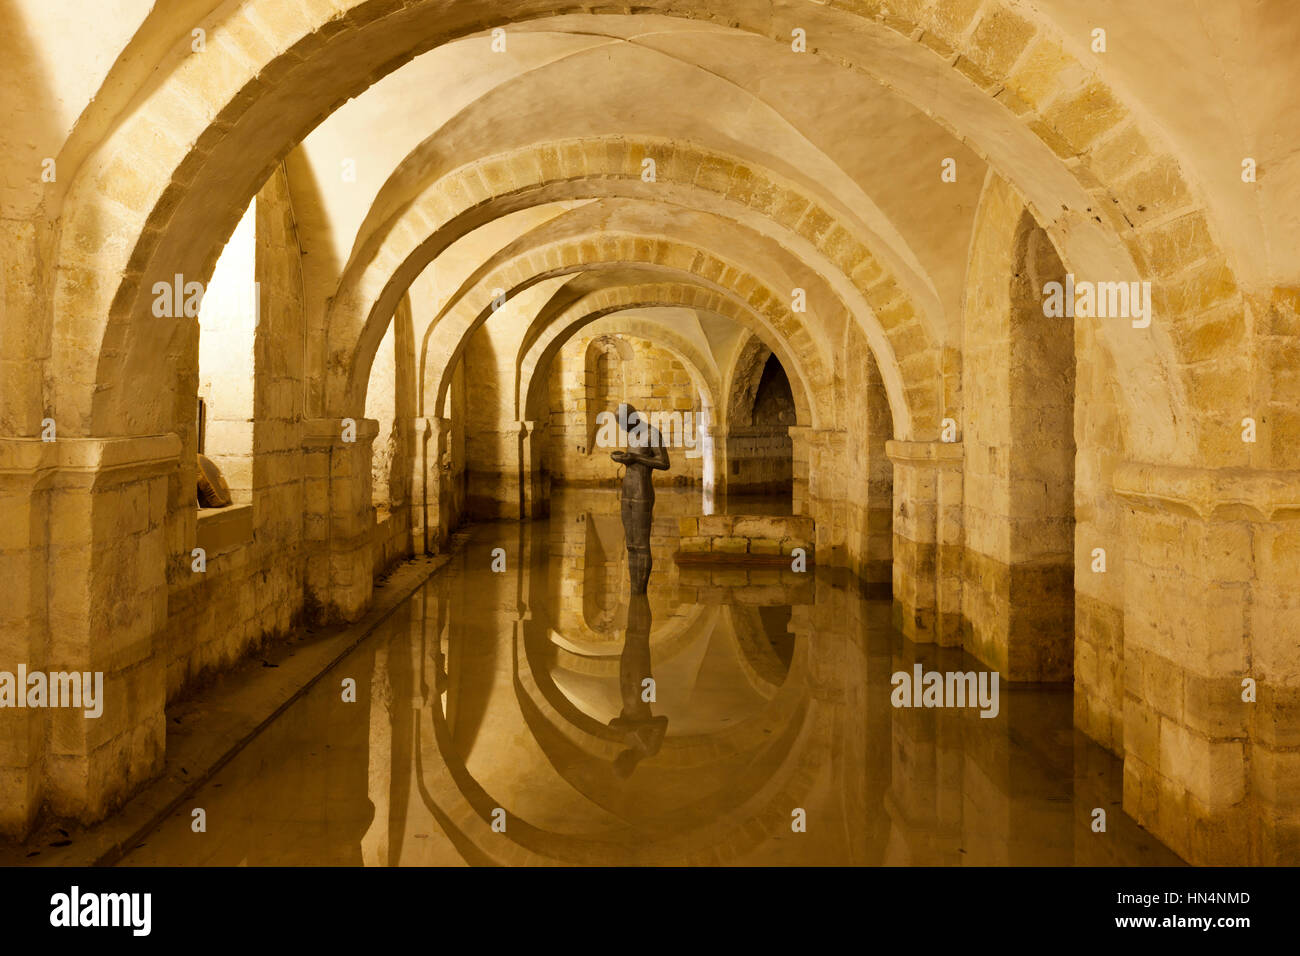 Winchester, Hampshire, UK - May 15, 2014: The flooded Crypt of Winchester Cathedral containing the sculpture 'Sound II' by british artist Antony Gorml Stock Photo